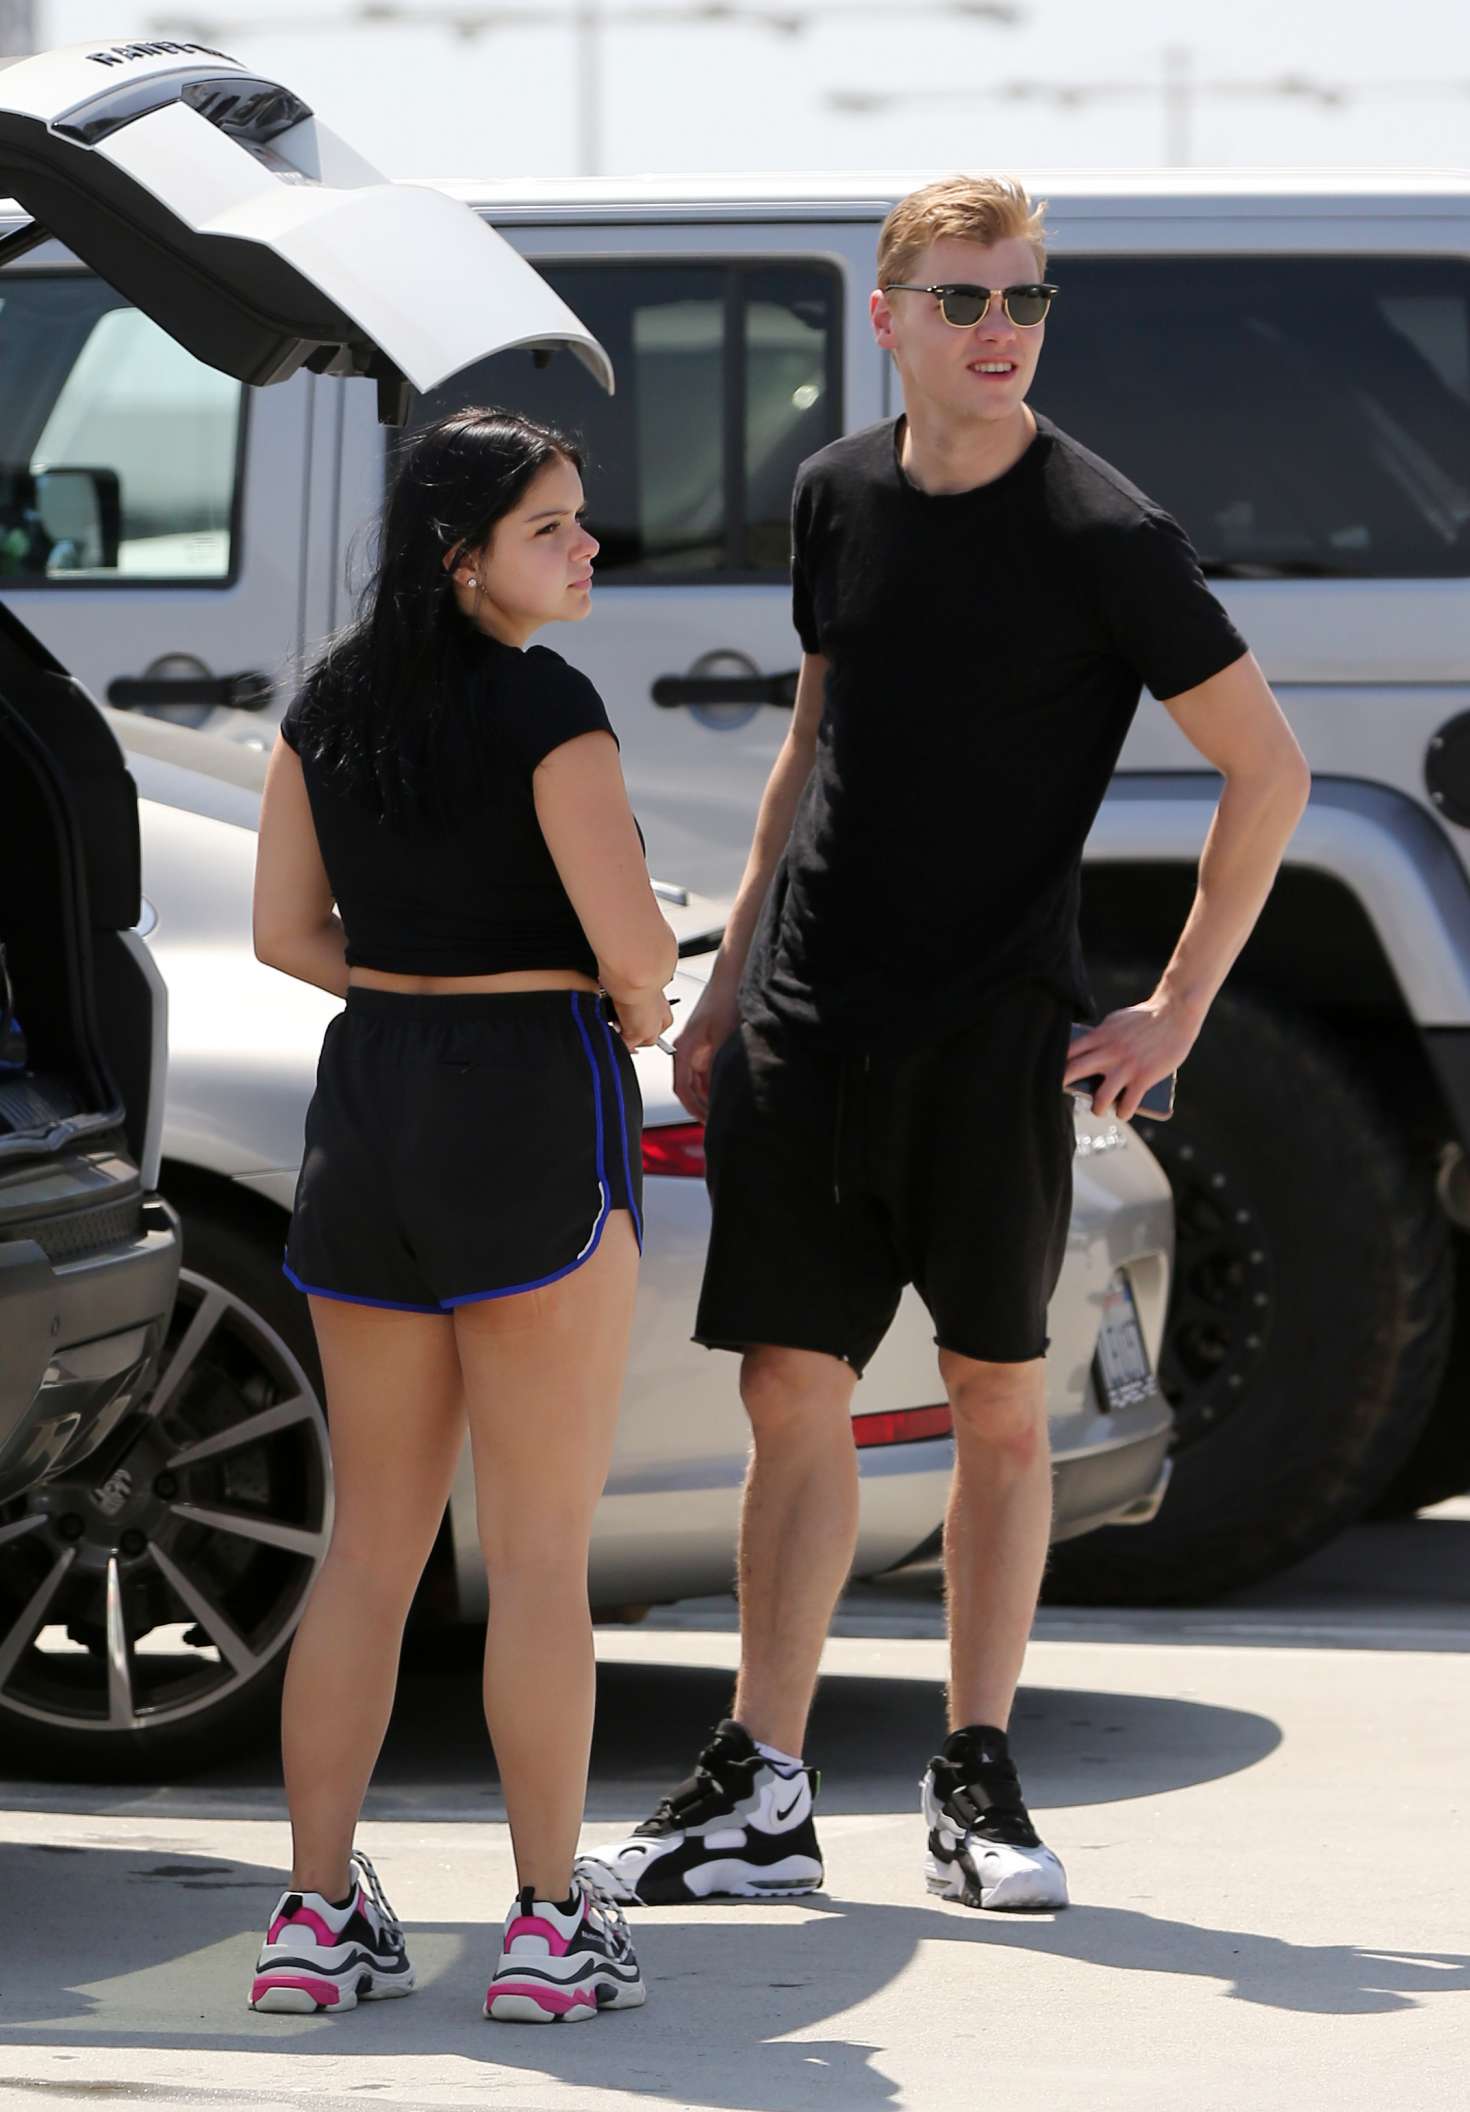 Ariel Winter in Shorts at LAX International Airport in Los Angeles